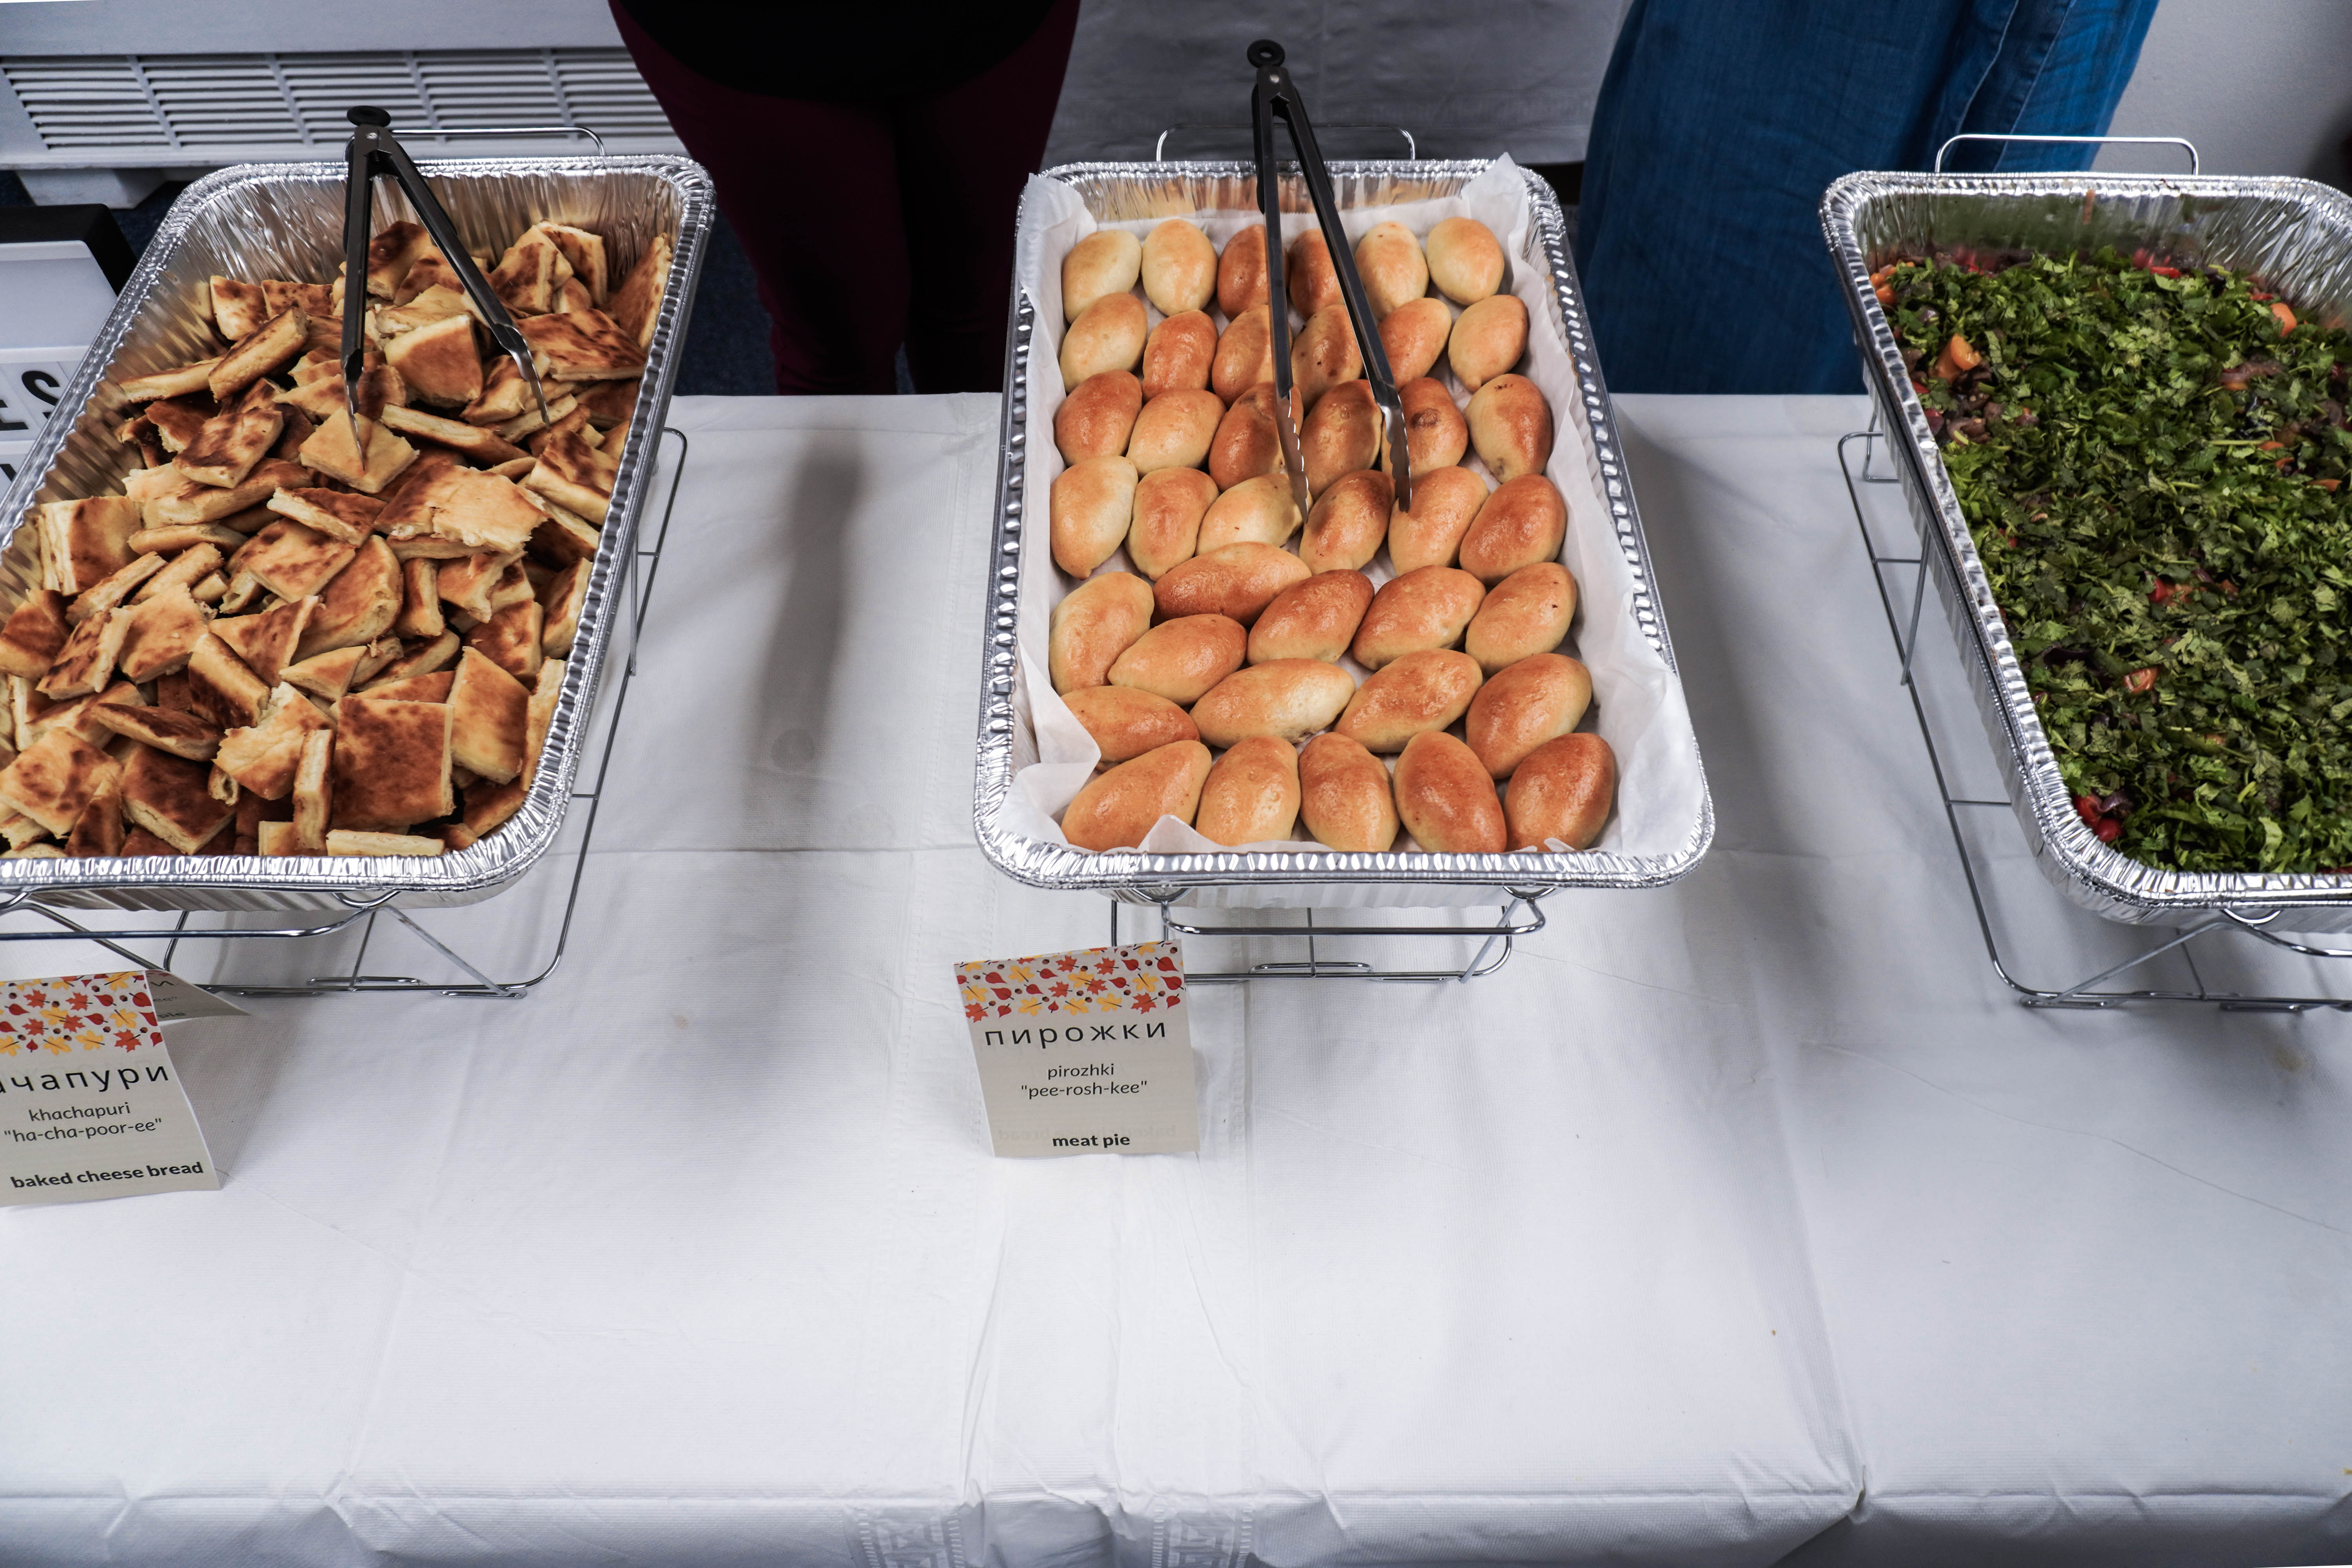 Diplomatic Language Services serves traditional Russian food at the DLS 2019 Harvest Festival